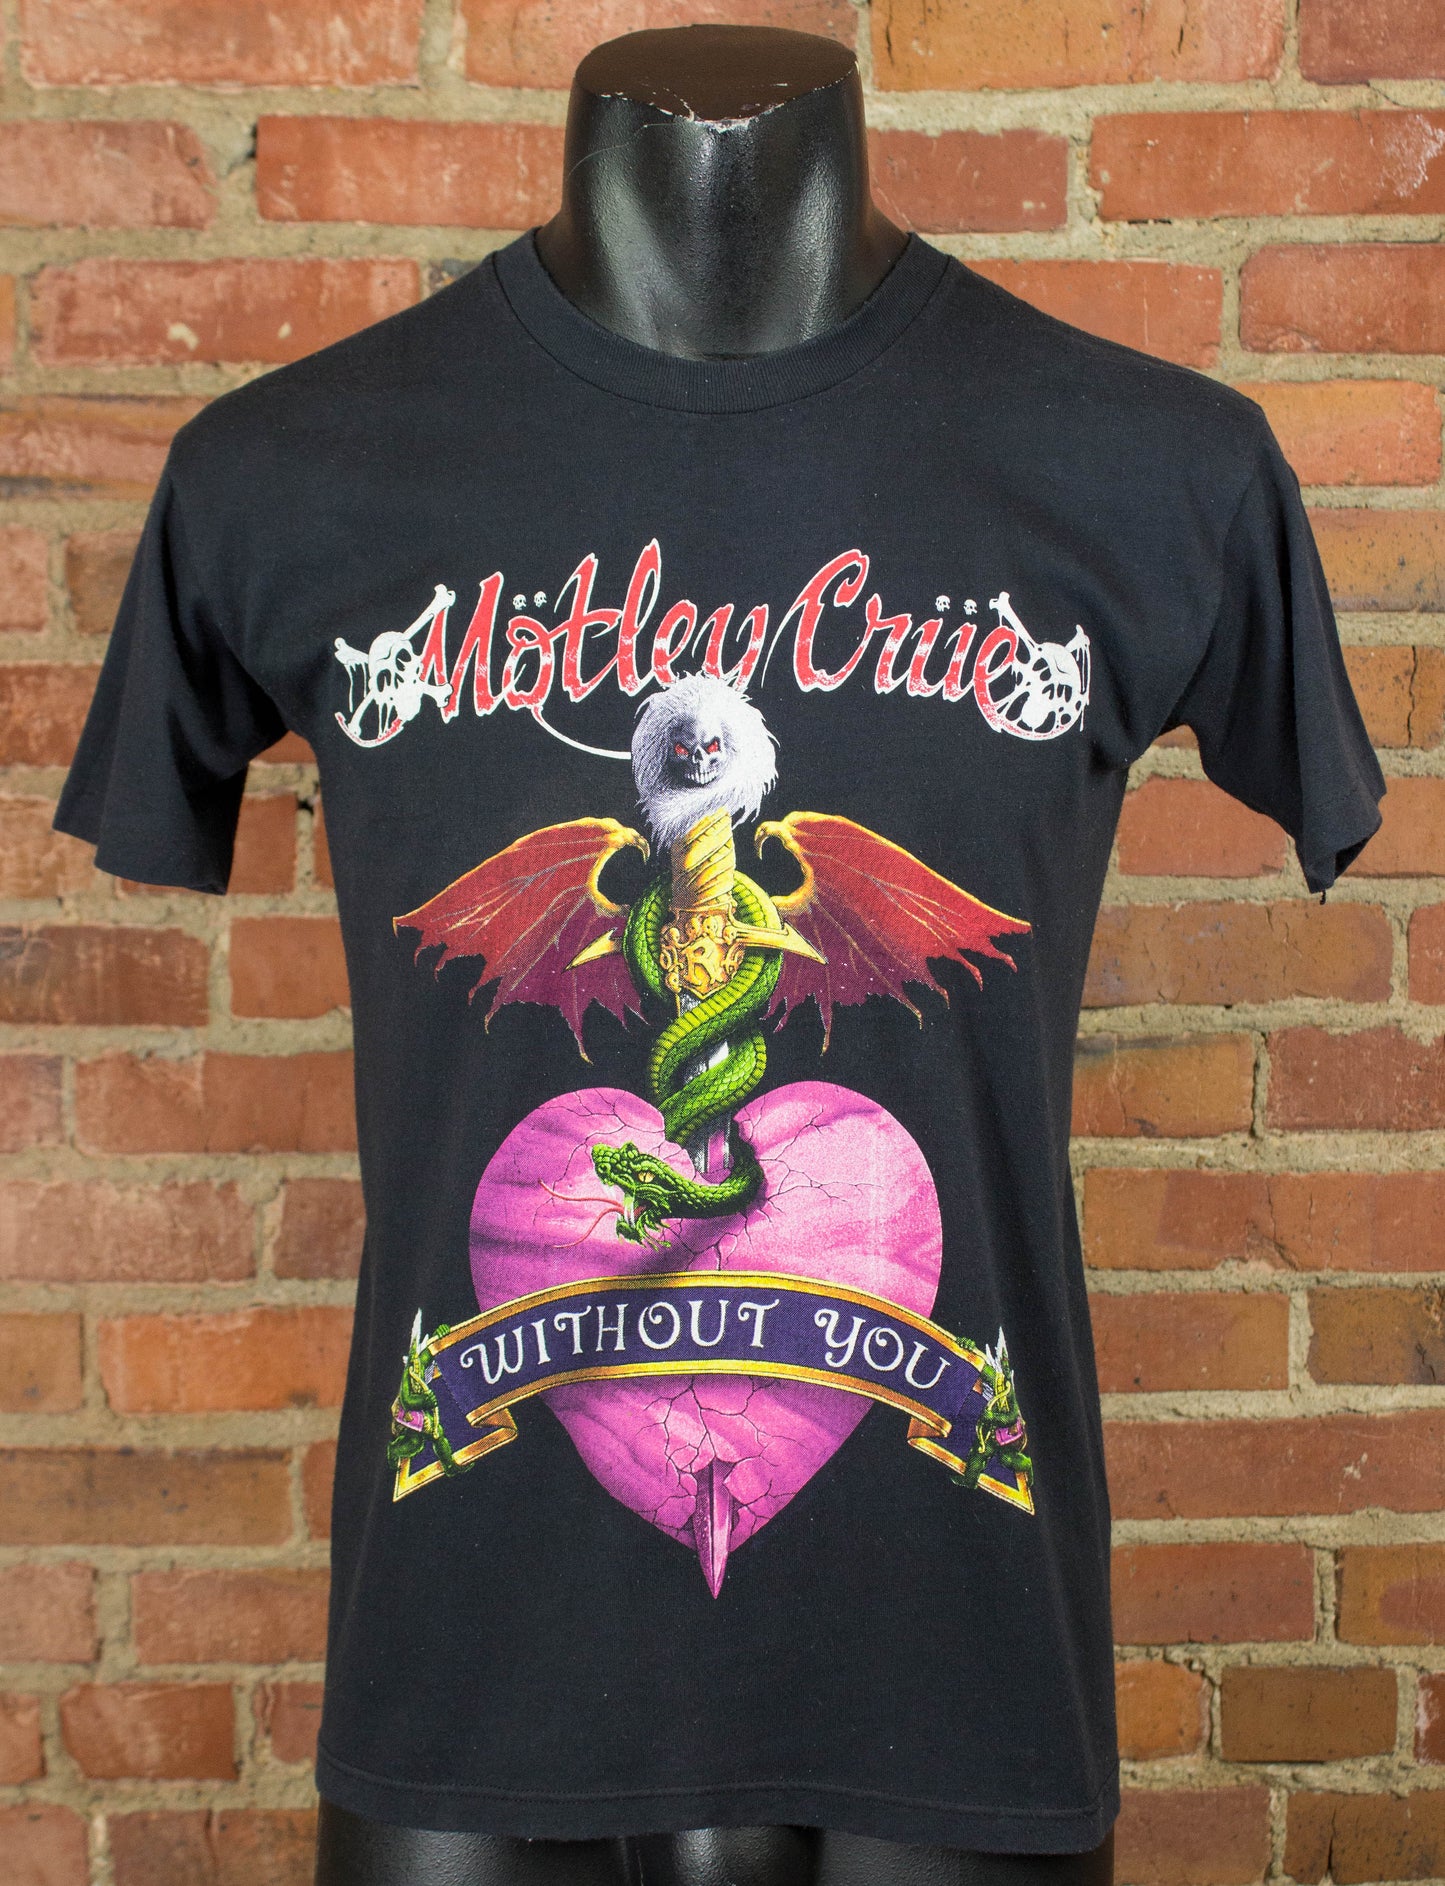 Vintage Motley Crue Concert T Shirt 1990 Without You Dr. Feelgood Black Small-Medium